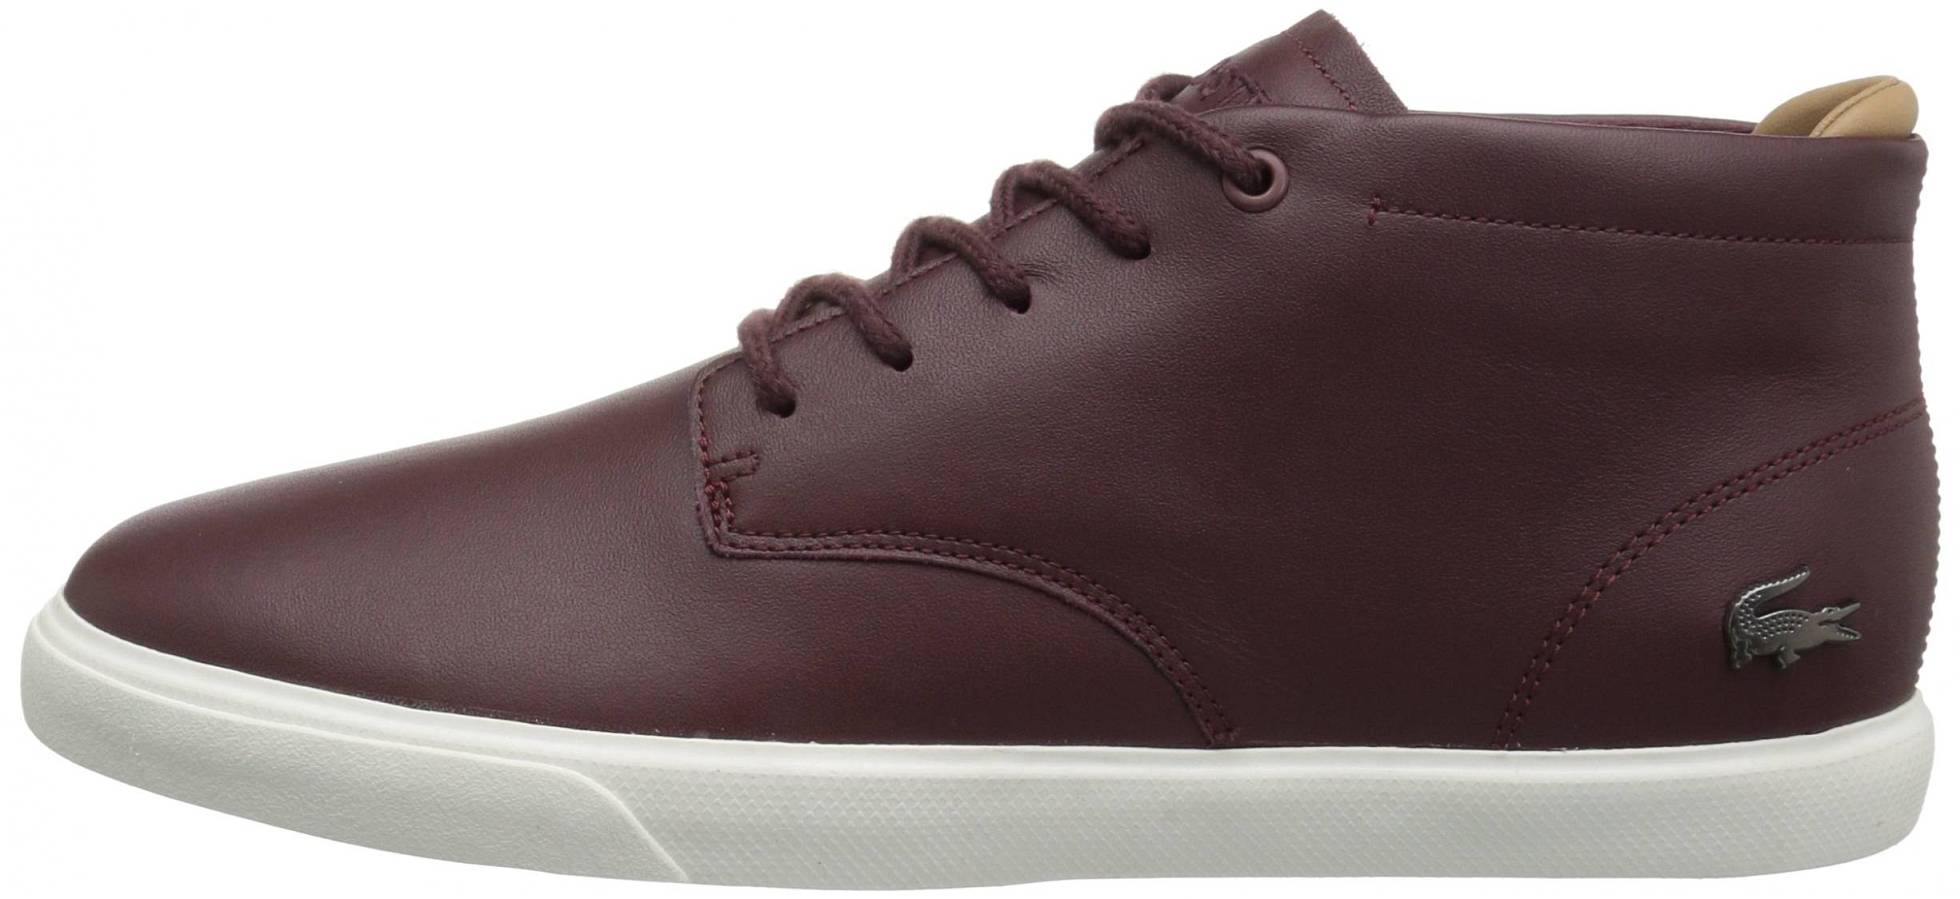 Lacoste Espere Chukka 317 1 – Shoes Reviews & Reasons To Buy